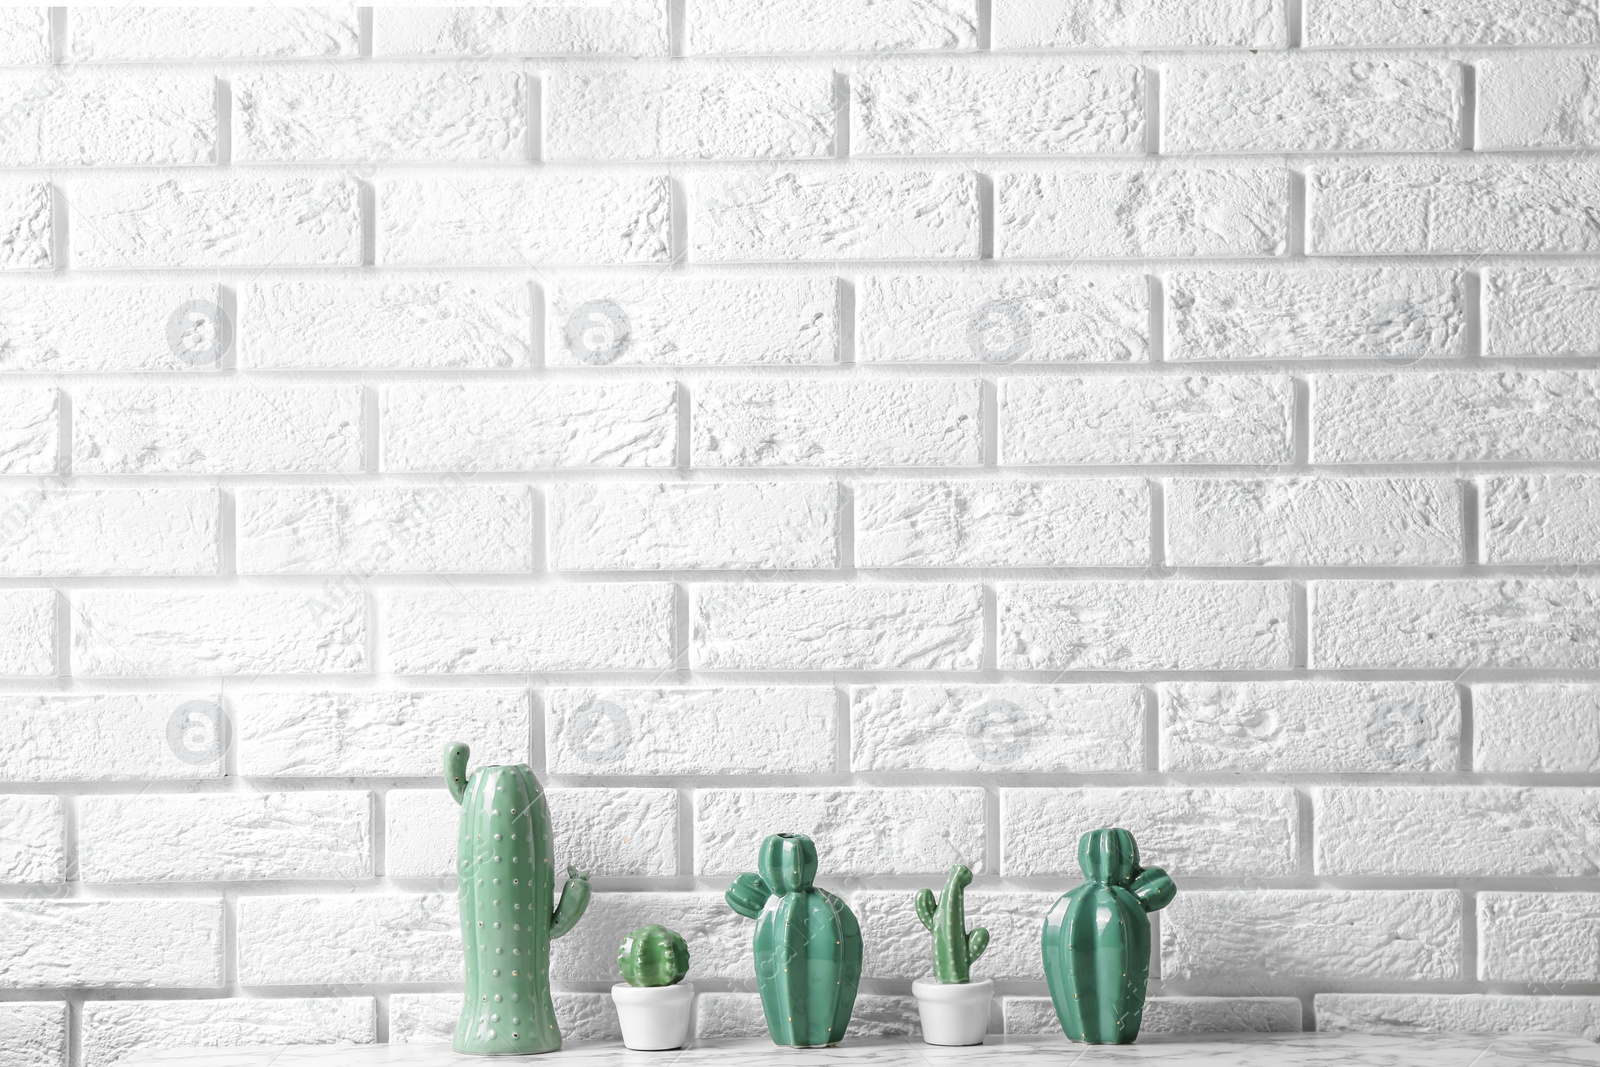 Photo of Decorative cacti on table near brick wall, space for text. Interior decor